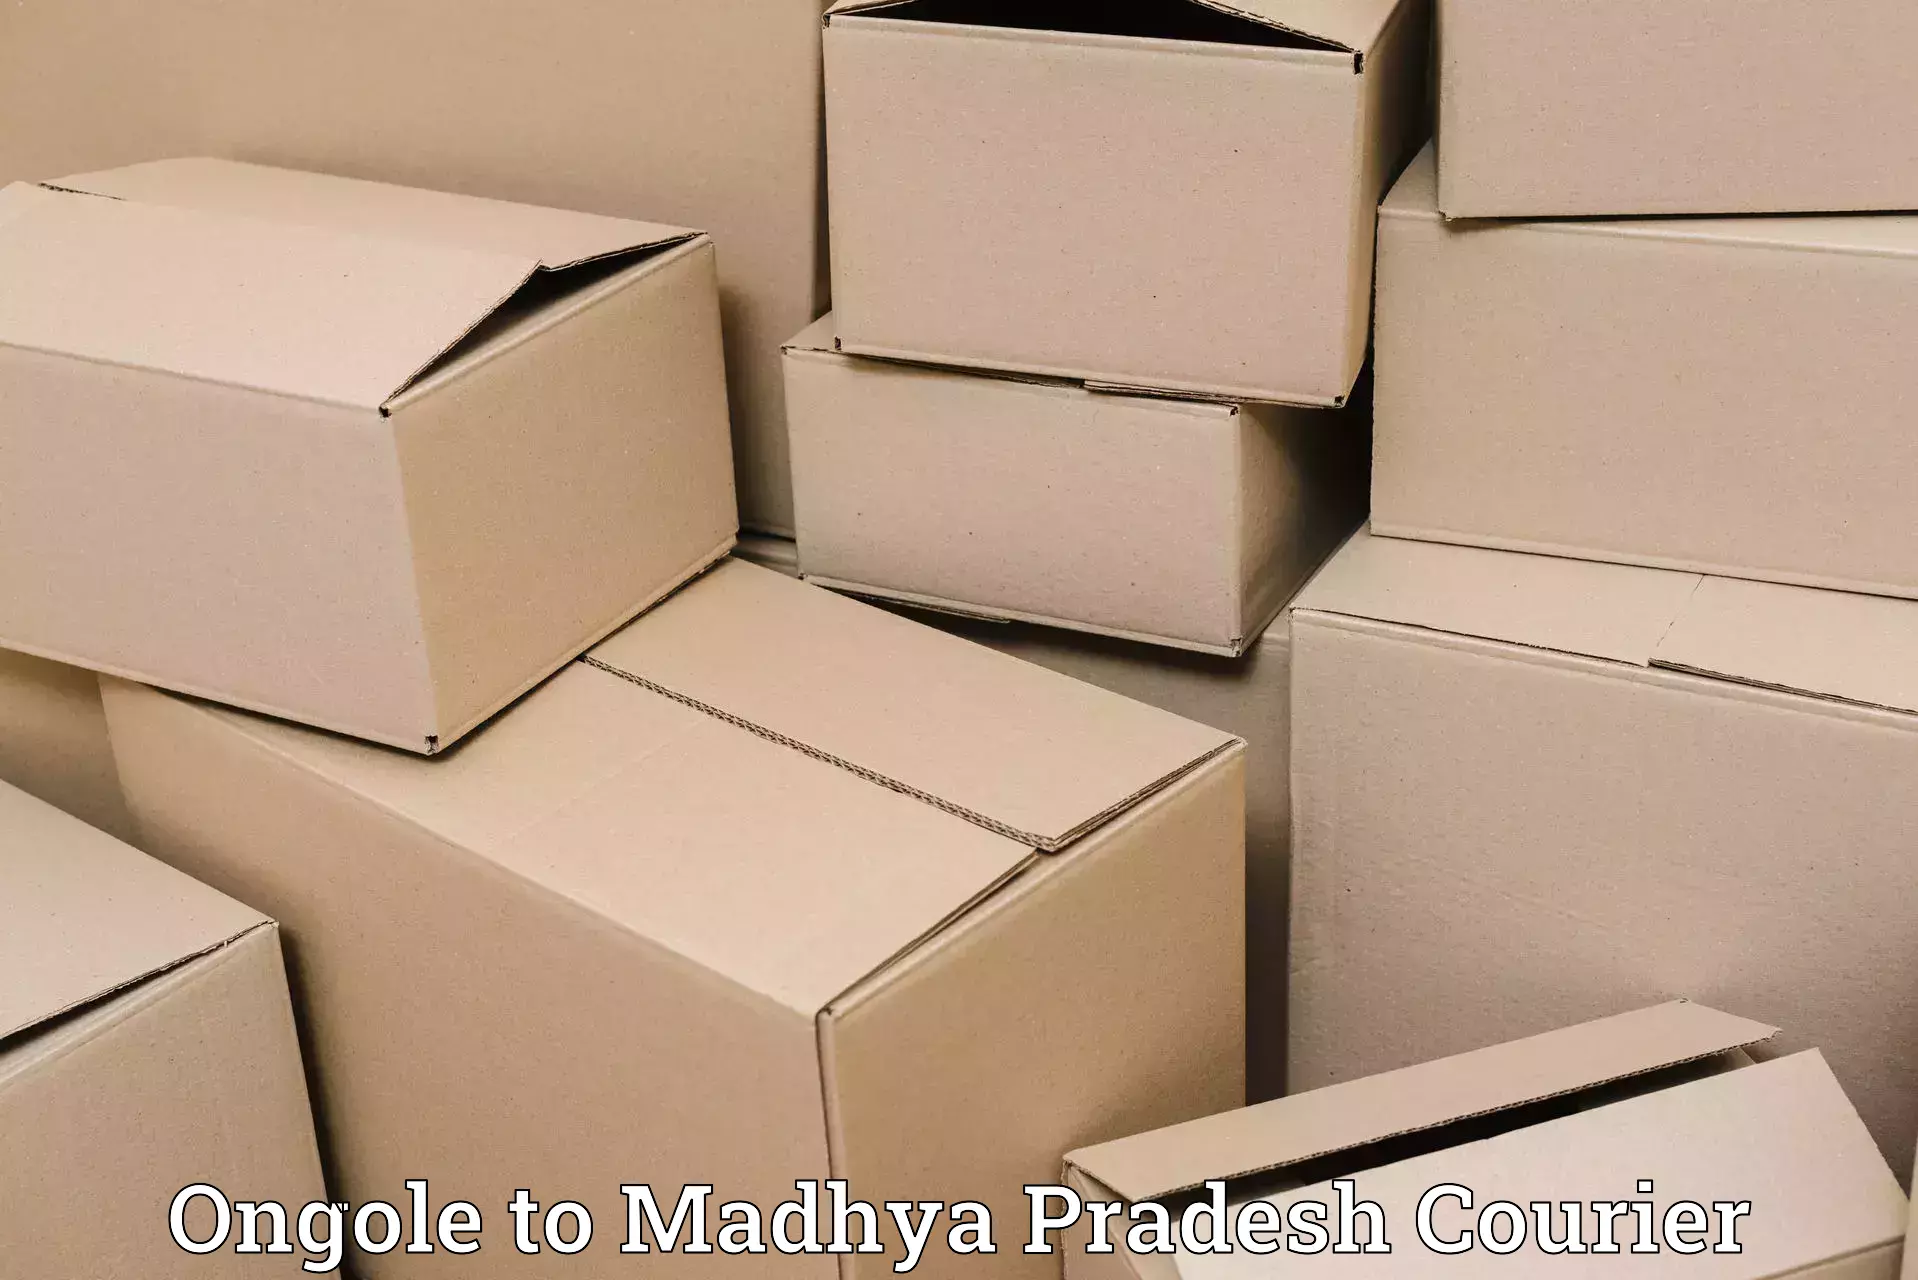 Reliable courier service Ongole to BHEL Bhopal